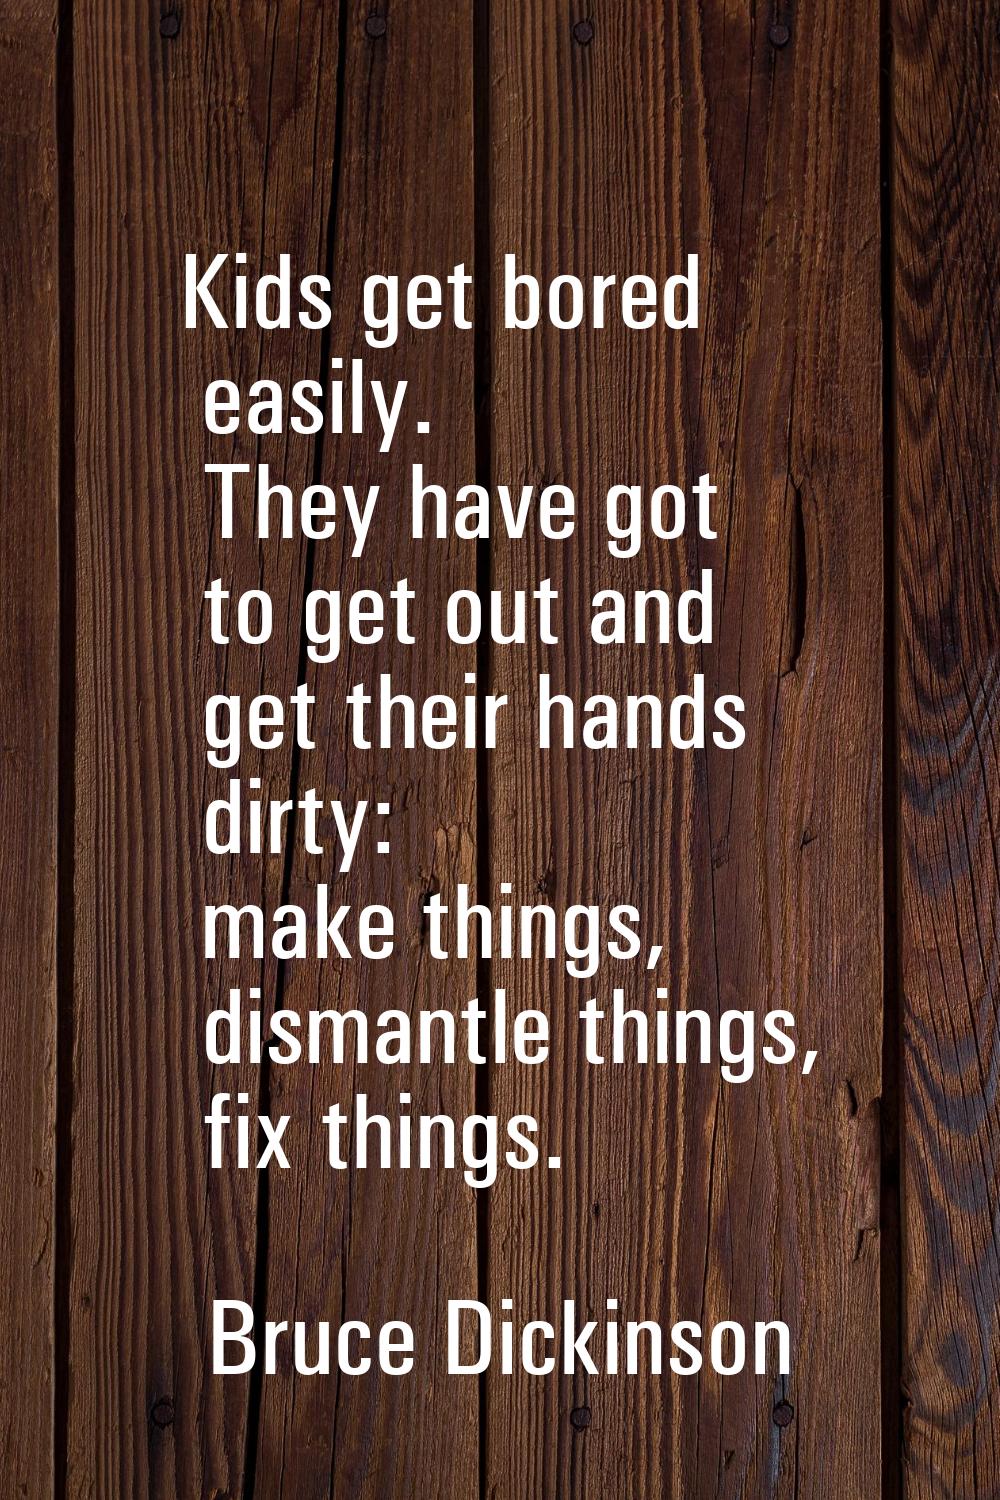 Kids get bored easily. They have got to get out and get their hands dirty: make things, dismantle t